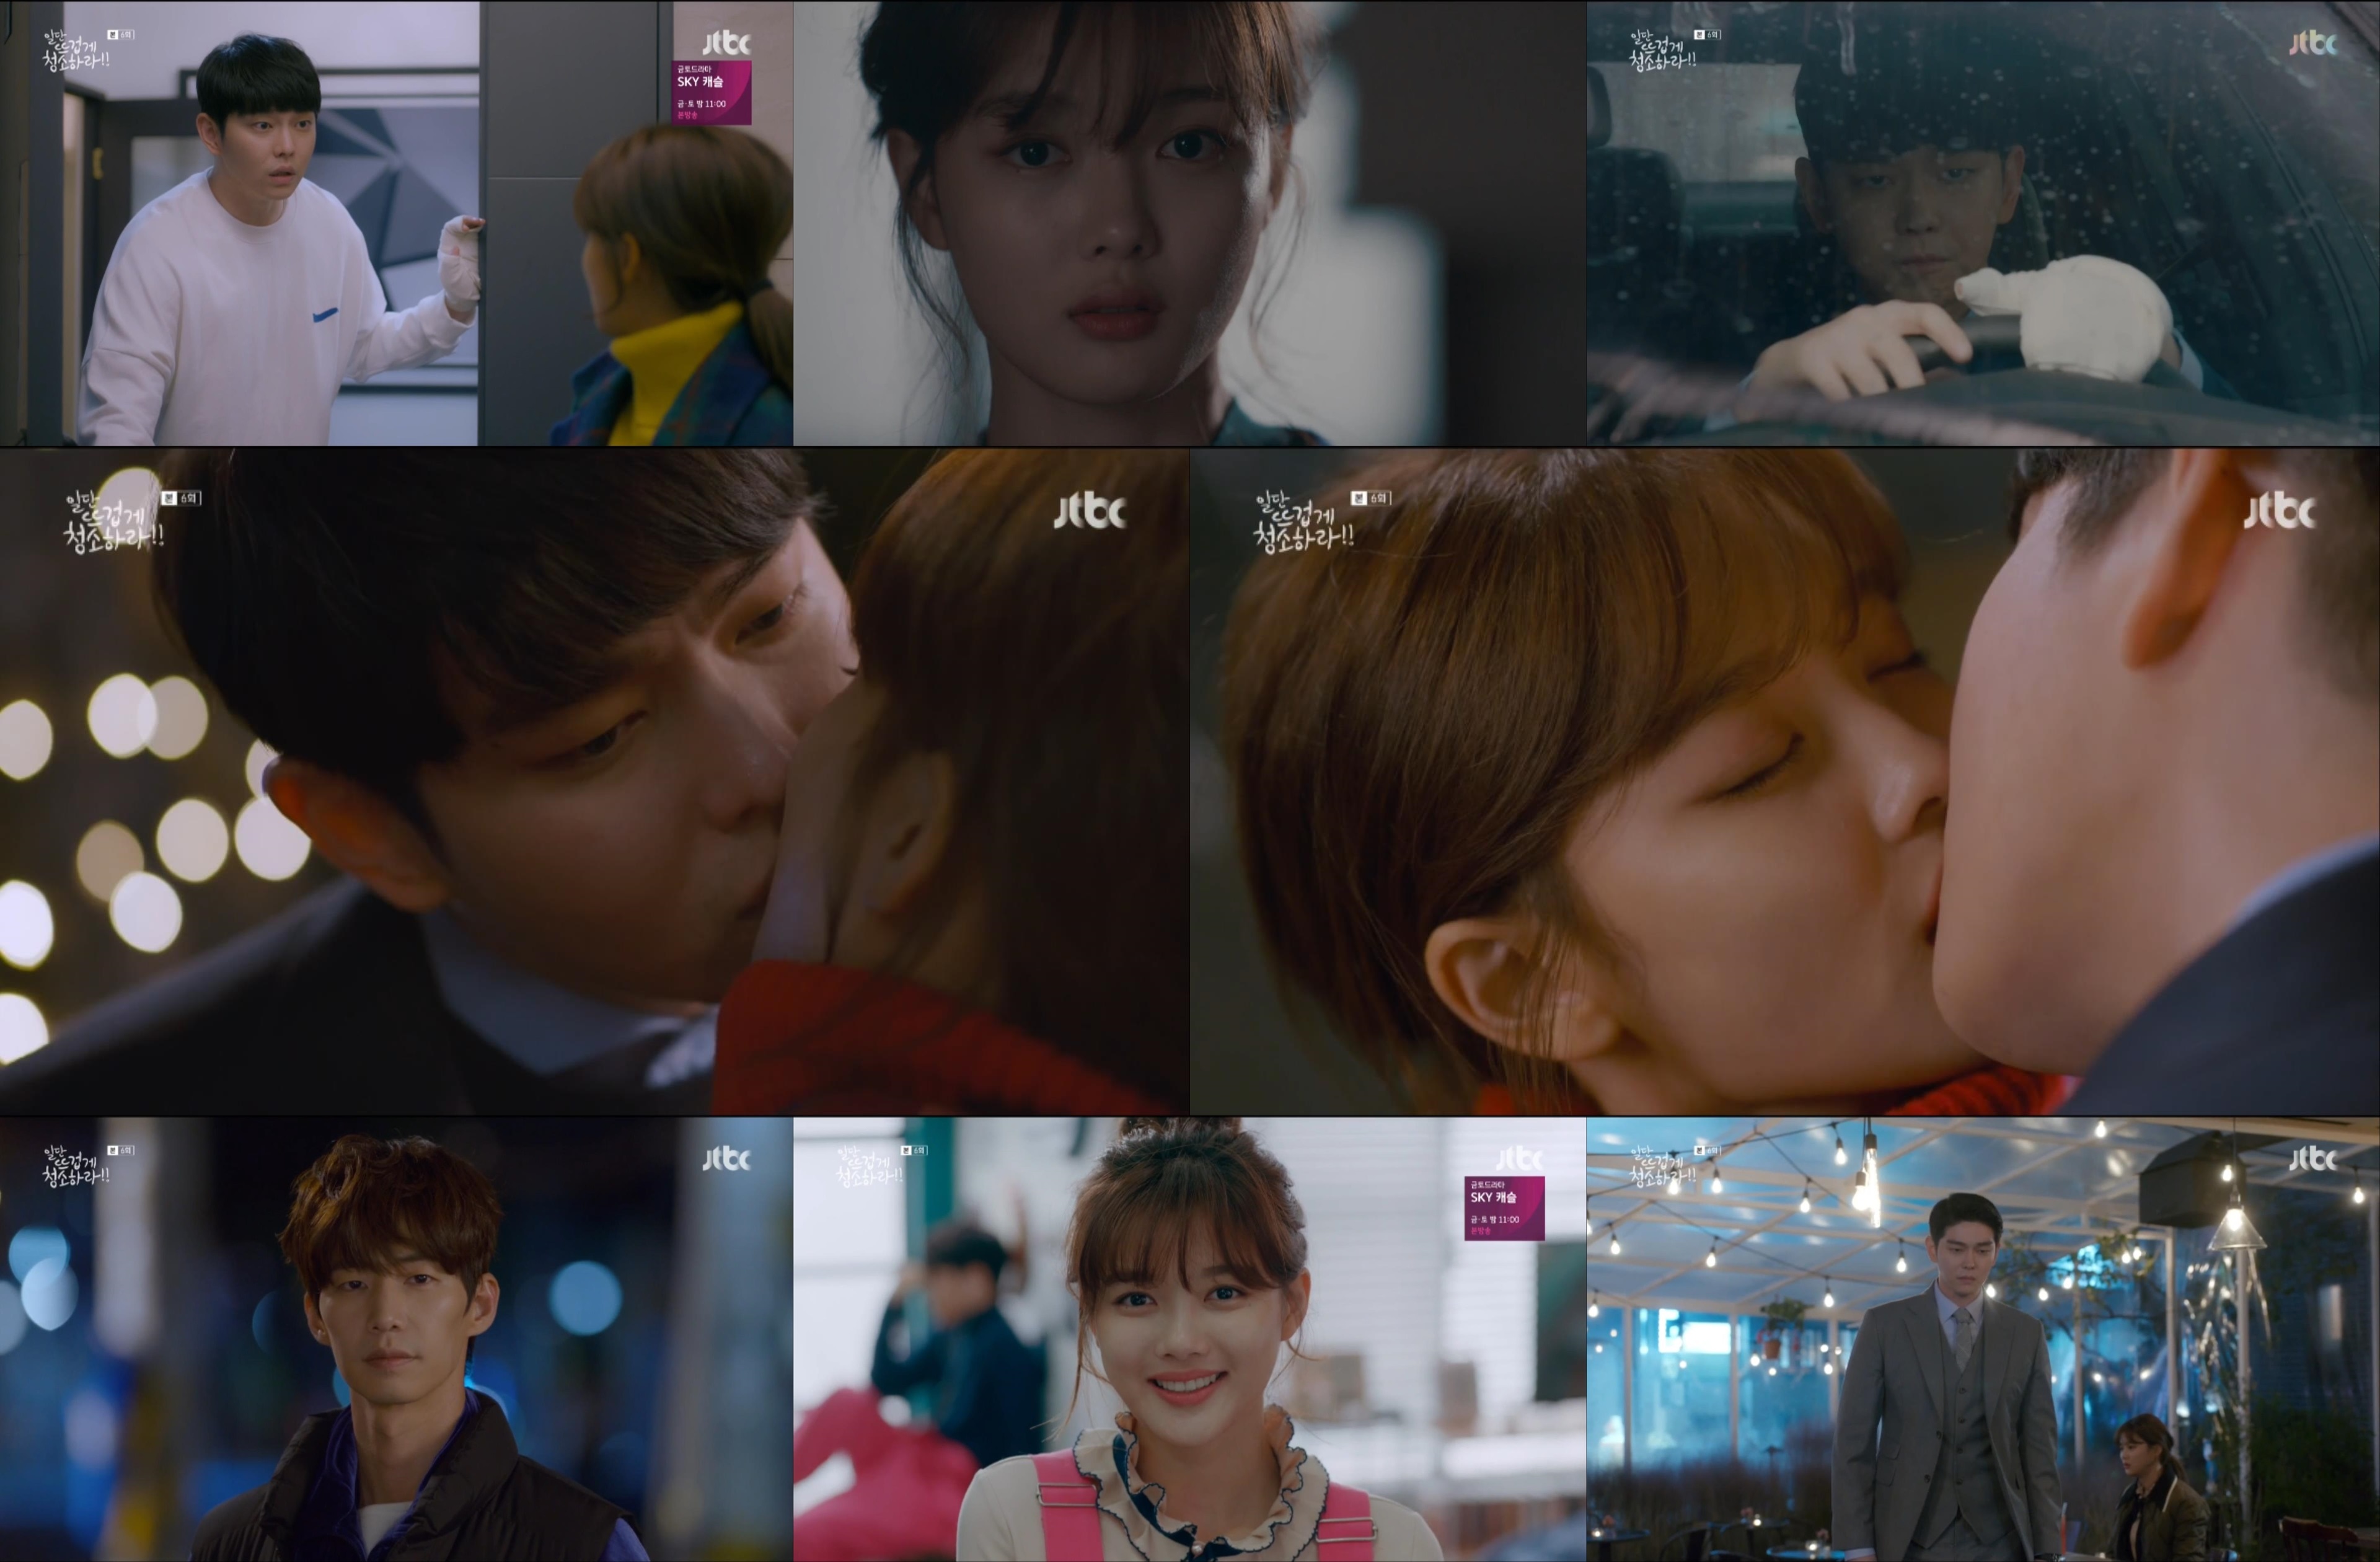 Once you clean up hot, Yoon Kyun-sang finally realized Love.In the 6th JTBC monthly drama Once Clean Hot (director Noh Jong-chan, playwright Han Hee-jung, production drama house, and Oh Hyung-je), which aired on the 11th, Sun-Jin (Yoon Kyun-sang) and Osol (Kim Yoo-jung) confirmed their sincerity toward each other with their second kiss and presented Simkung moment.Osol went home with a boiled soup for the sake of his pre-emption to save himself.In the awkward air that was placed alone in one space, the presiding apologized for the spray incident that was in the daytime, and Osol, who learned about the presiding of the presiding through the cleaning fairy staff and Kwon secretary (Yoo Seon-min), comforted him with the words I look exceptional and Is there a reason for each?It was the moment when the relationship between the two people, who had been constantly twisted into misunderstandings, became warm in understanding.The event that brought about a decisive change to the two men who were close to one step, Osol was alone in cleaning up the business trip, a male customers home in an old multi-family house.With an unknowing tension in the dim house atmosphere somewhere, the presiding learned that the place where Osol went on a business trip was the home of a blacklist customer who had had two sexual harassment cases in the past.The anxious pre-emption ran straight through the rain to save the osole, barely avoiding the moment of crisis, but the hand of the pre-emption had a small wound.The presupposition to Osols hand, which was applying the medicine, convinced him that his Feeling was Love, and that it was all clear, and there was nothing to fear.The figure of the first step of hugging and kissing the osole at once raised the thrilling index to its peak.After a sudden kiss of pre-emption, Osols sickness began, but the pink excitement also began to cool the Osol again for a moment.The kiss of the day was sincere, but the prescient turned away from his own Feeling. In fact, the prescient had pain.Love and Love were all negative things for the first time that I grew up watching my lovers who met my mother Cha Mae-hwa (Kim Hae-eun).In the end, Osol, who first talked about the kiss of the day, turned to Osol, saying, Did you expect a word?The first thing that hurt Osol more because of his wounds. The relationship between the two people, which had been broken again, was sad.On the other hand, Chois bitter expression (Song Jae-rim), who watched the kiss of the prestige and the osole at a distance, raised expectations for triangular romance.Chois complex subtle expression, which learned about the relationship between Seon-gyeol and Cha (Ahn Seok-hwan), also stimulated curiosity.Attention is focused on how the secret relationship of the complicated people will affect the future development.Clean up hot once is broadcast every Monday and Tuesday at 9:30 pm on JTBC.